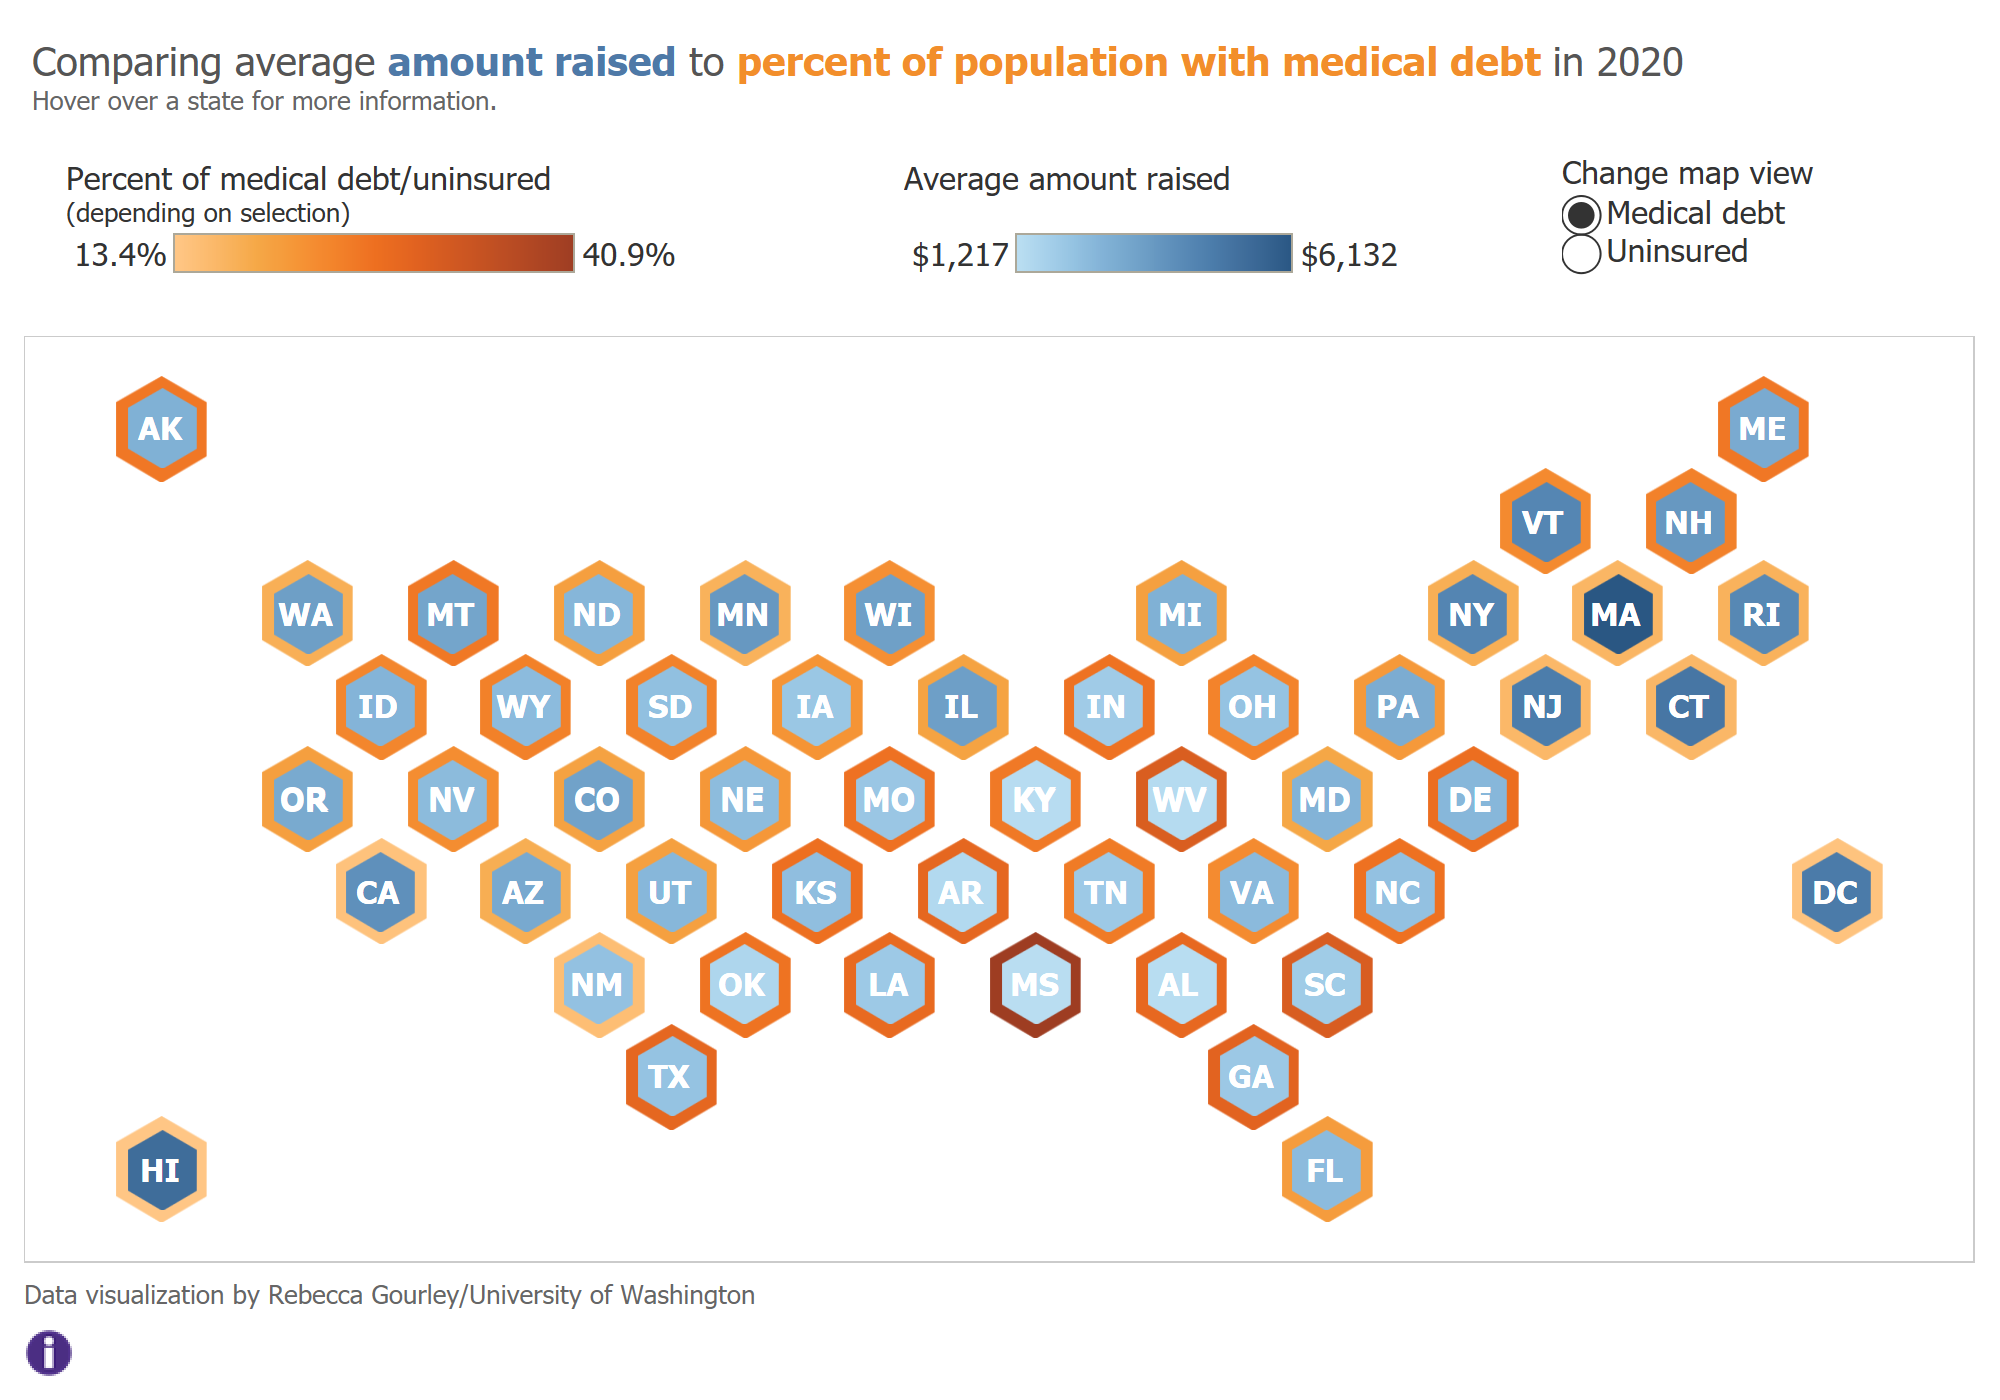 a hexagonal data map of the united states, each state represented in a hexagon. the text at the top says 'Comparing average amount raised to percent of population with medical debt in 2020. Hover over a state for more information.' below that is a data key and the text 'percent of medical debt/uninsured' with a rectangular bar with 13.4% on the left and 40.9% on the right, with a yellow to orange color from left to right. next to that is another key that reads 'average amount raised' with a rectangular bar with $1,217 on the left and $6,132 on the right, with a light blue to dark blue color from left to right.